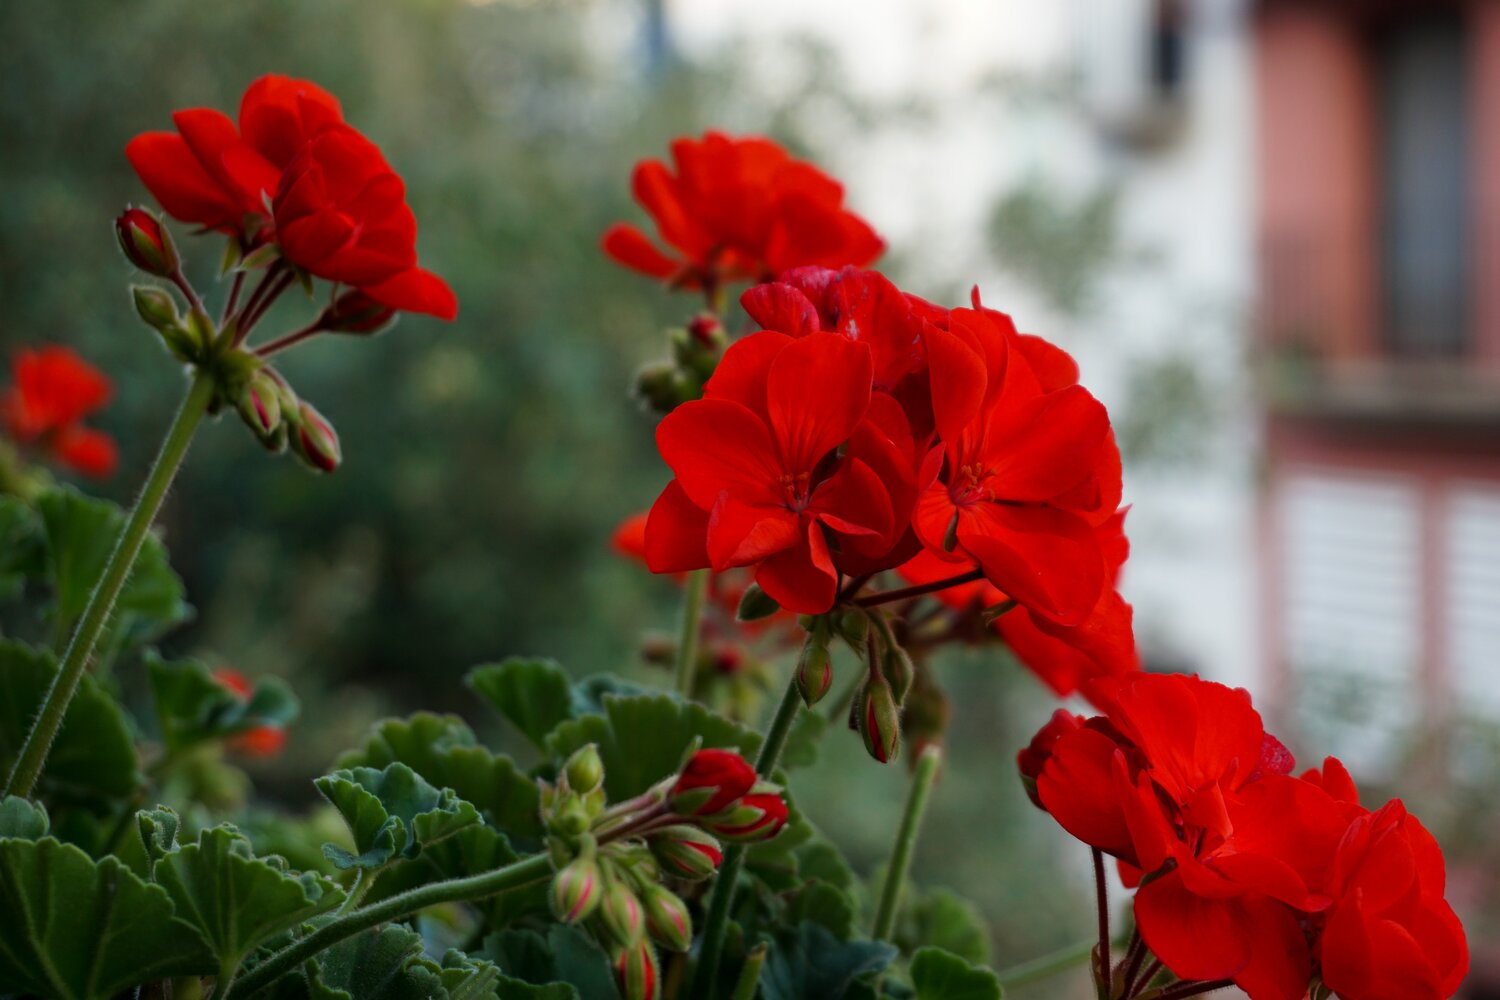 Repeated punctuation like the red of this geranium can pull a garden design together.